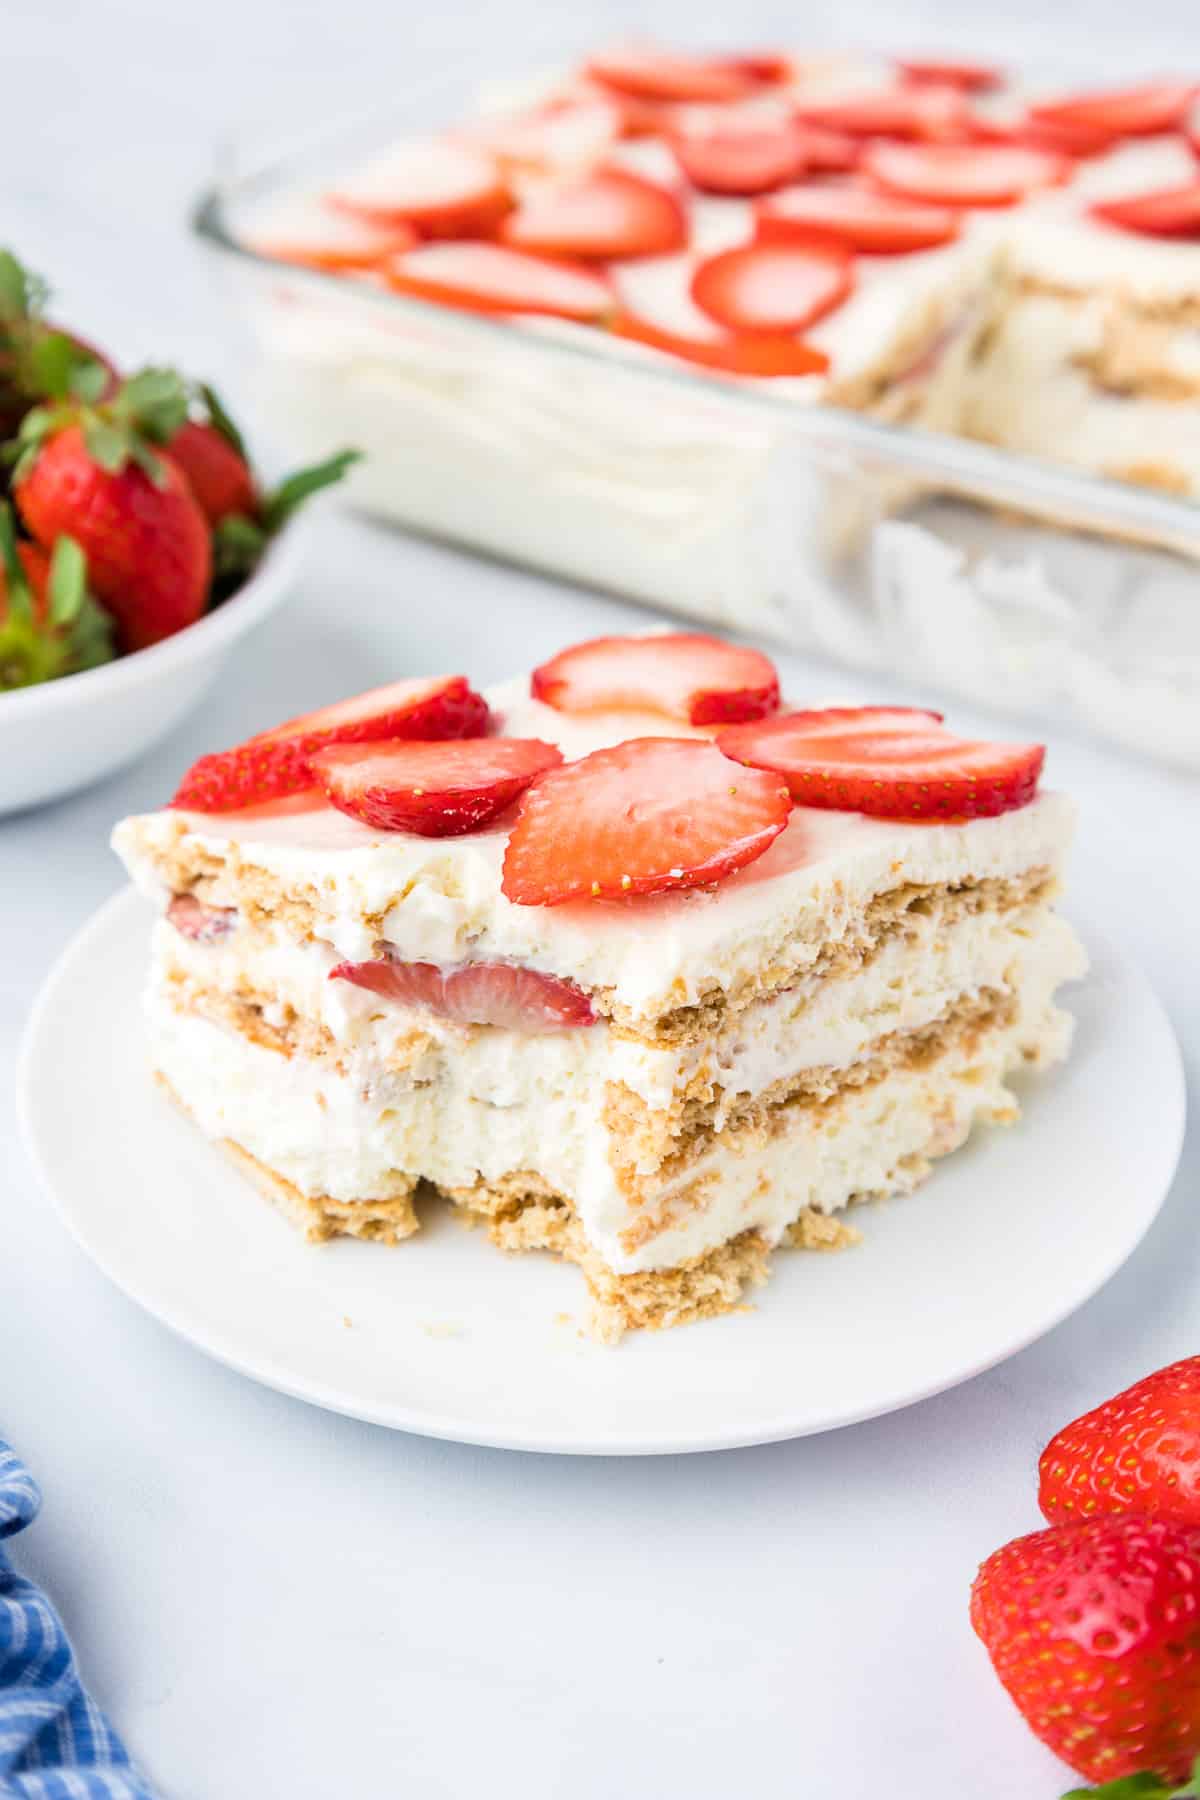 A slice of strawberry cream cheese icebox cake on a plate missing a bite with the rest of the cake and more strawberries in the background on the counter.